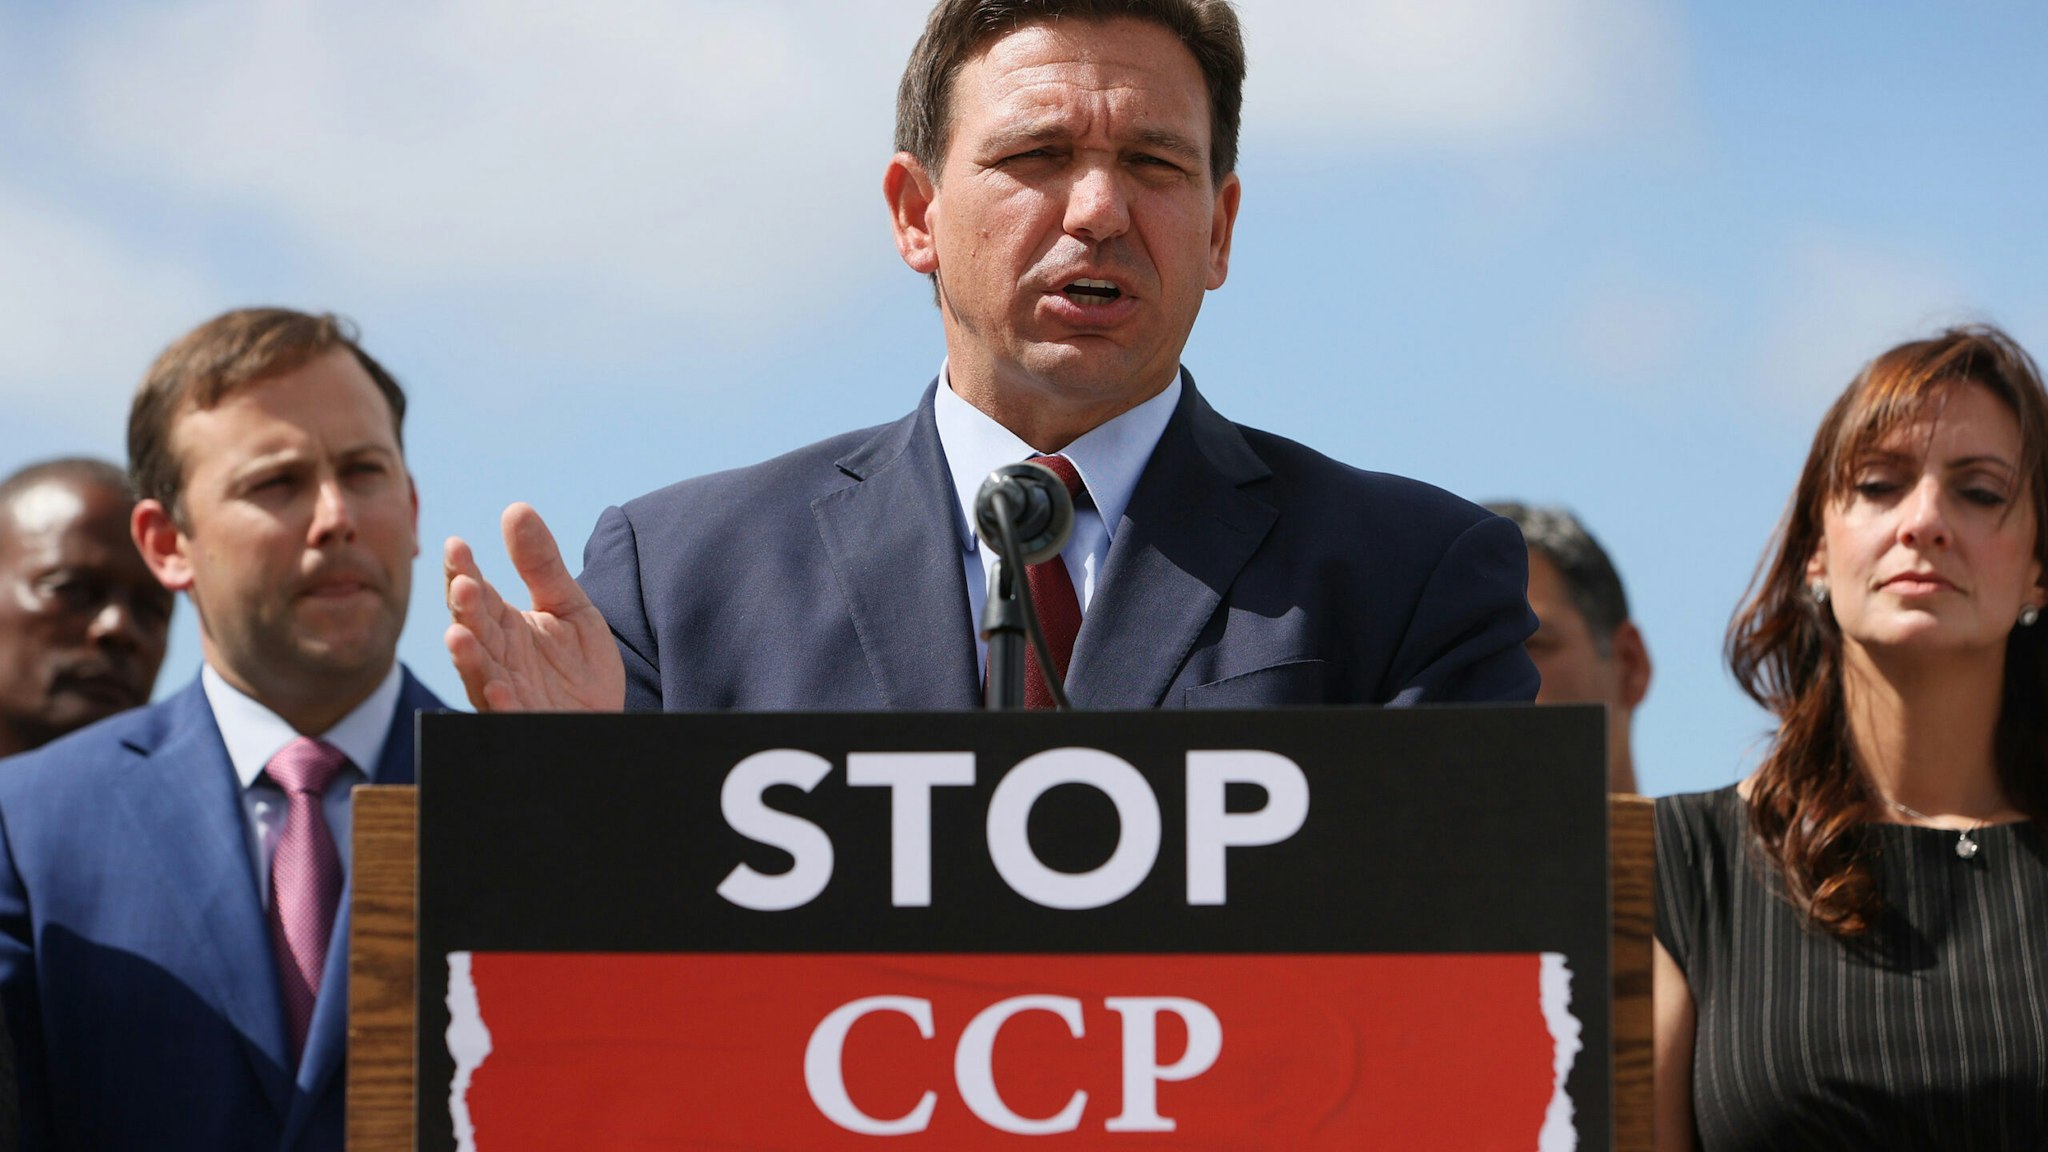 MIAMI, FLORIDA - JUNE 07: Florida Gov. Ron DeSantis speaks during a press conference held at the Florida National Guard Robert A. Ballard Armory on June 07, 2021 in Miami, Florida. The governor had the press conference to speak about two bills he signed to combat foreign influence and corporate espionage in Florida from governments like China.